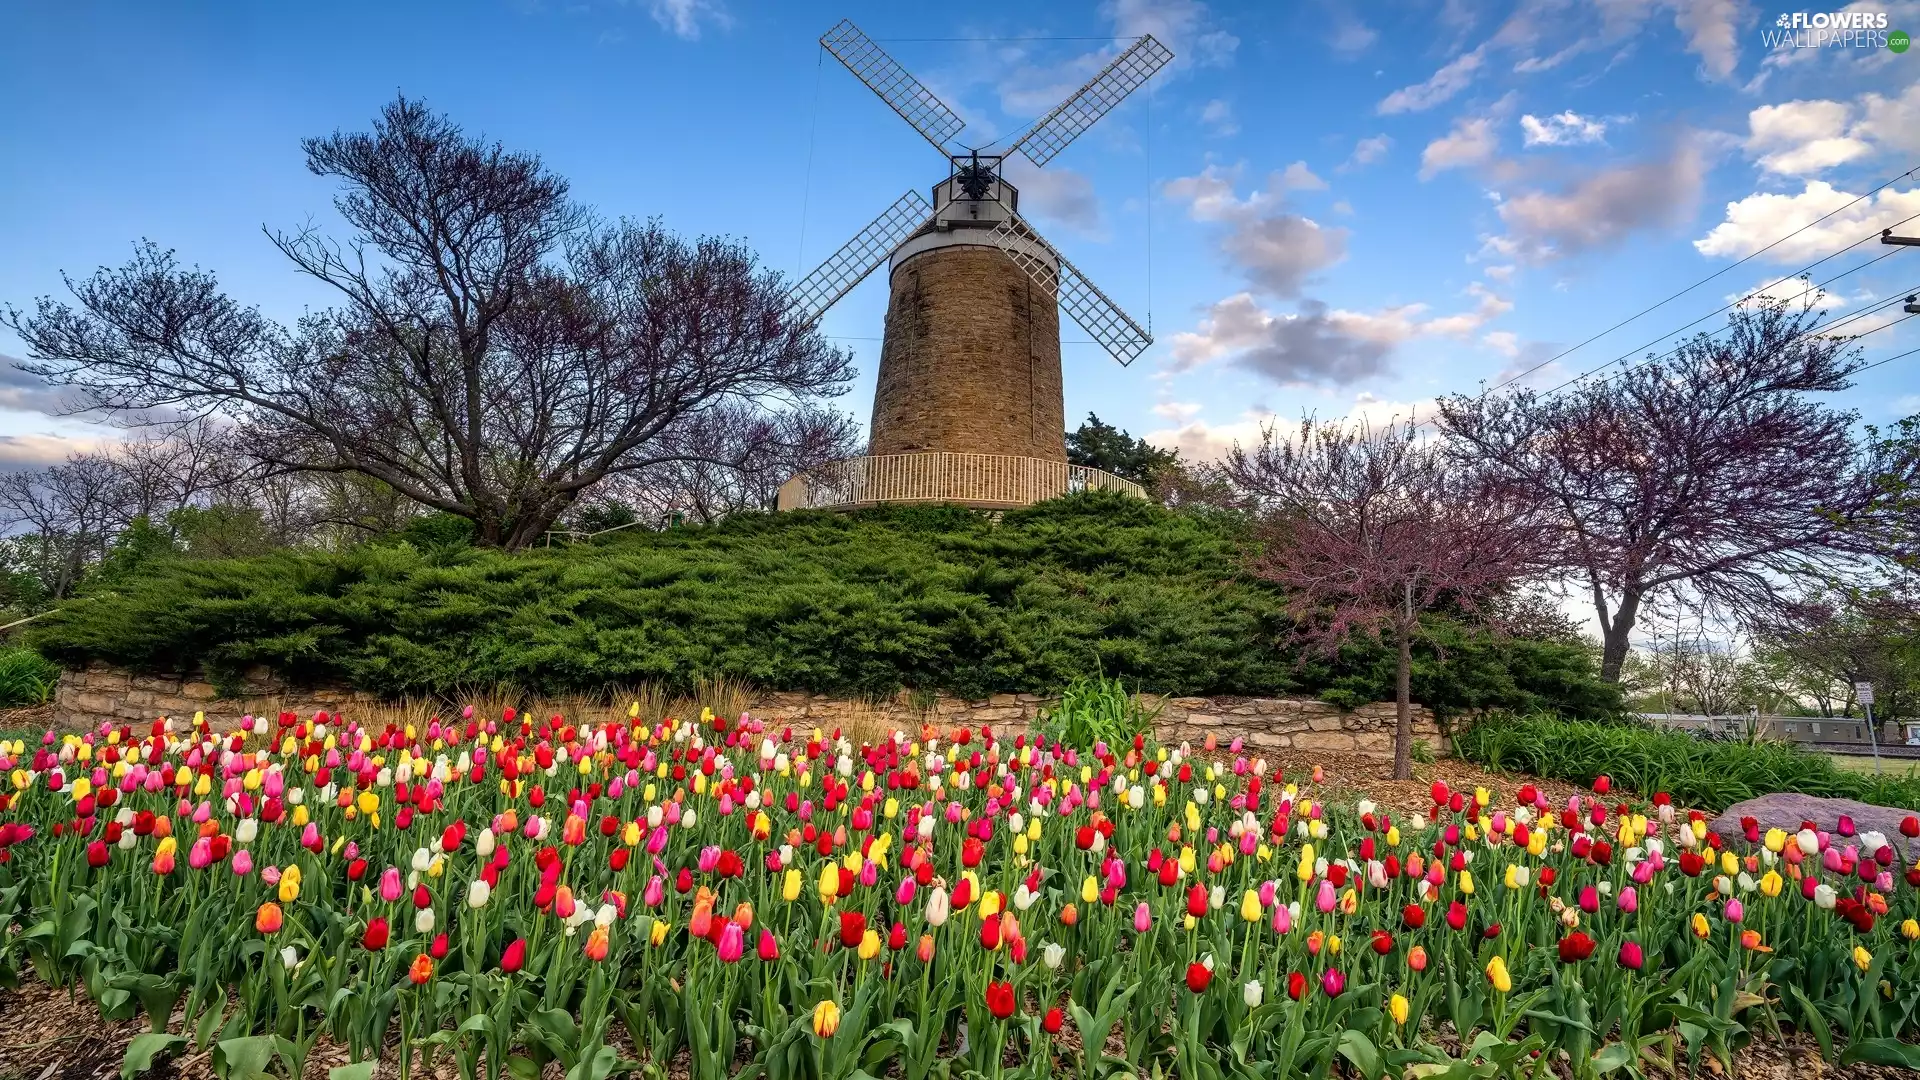 Windmill, trees, viewes, Tulips